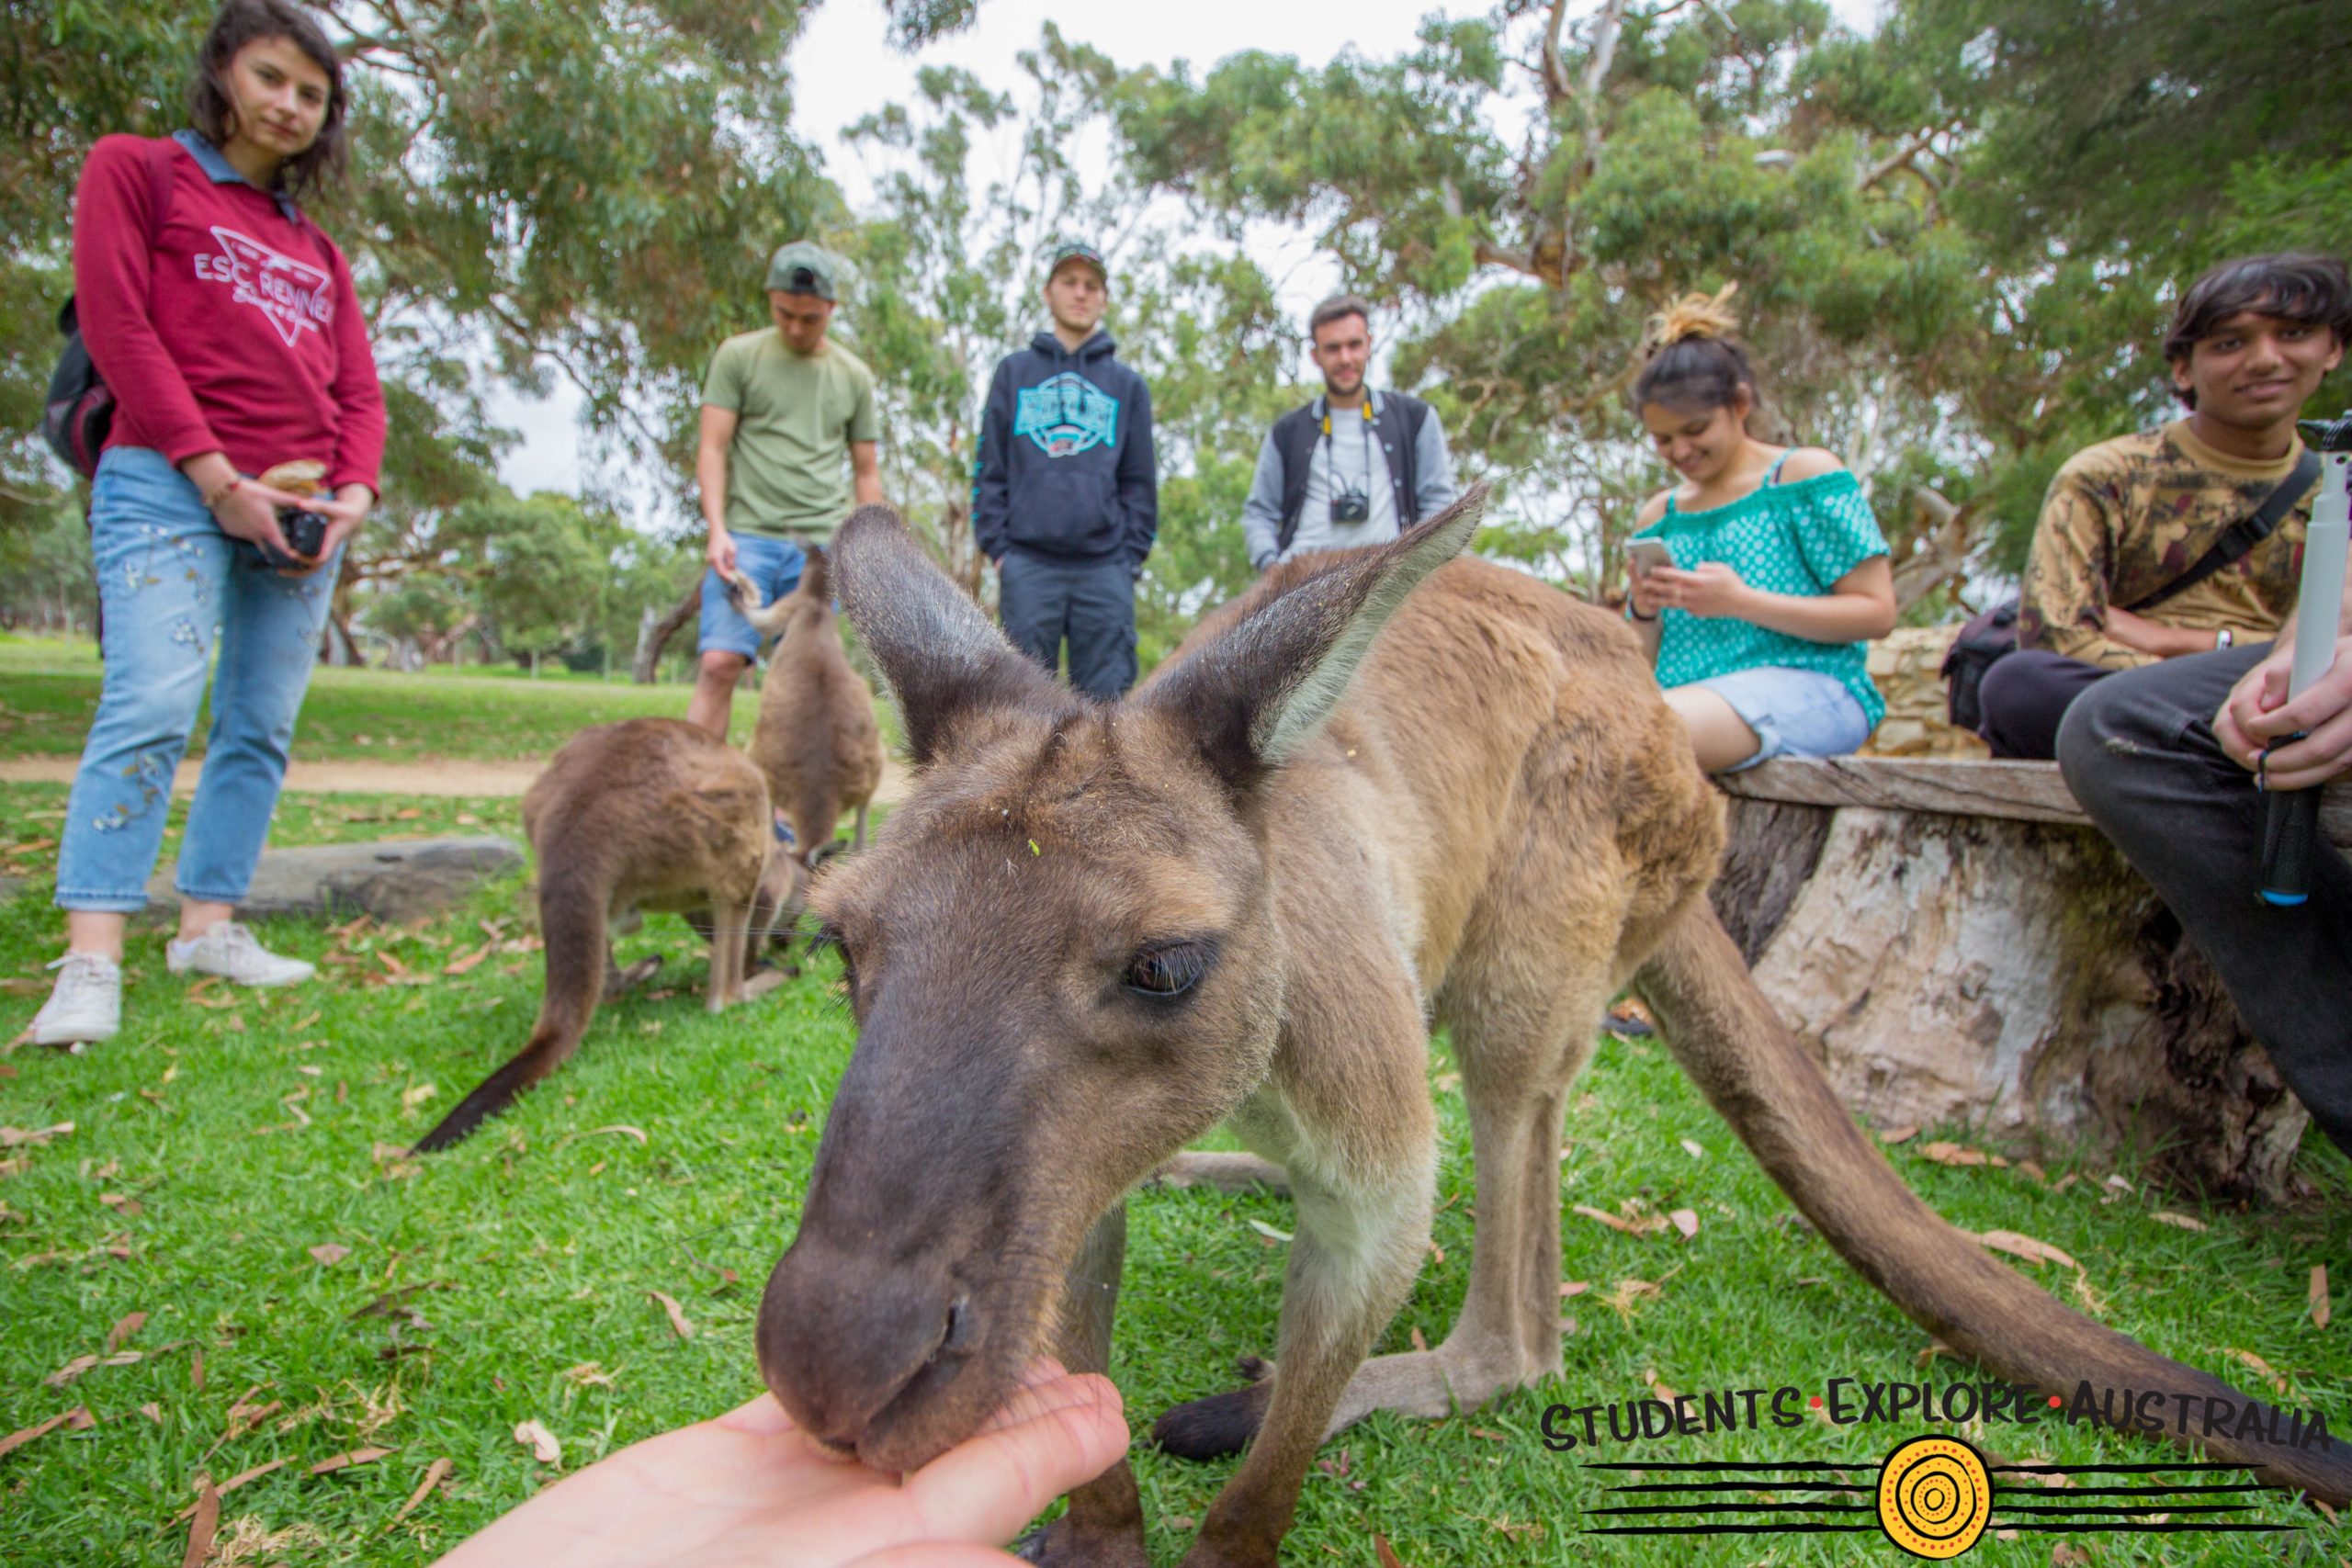 Kangaroo eating from human hands watched by other humans